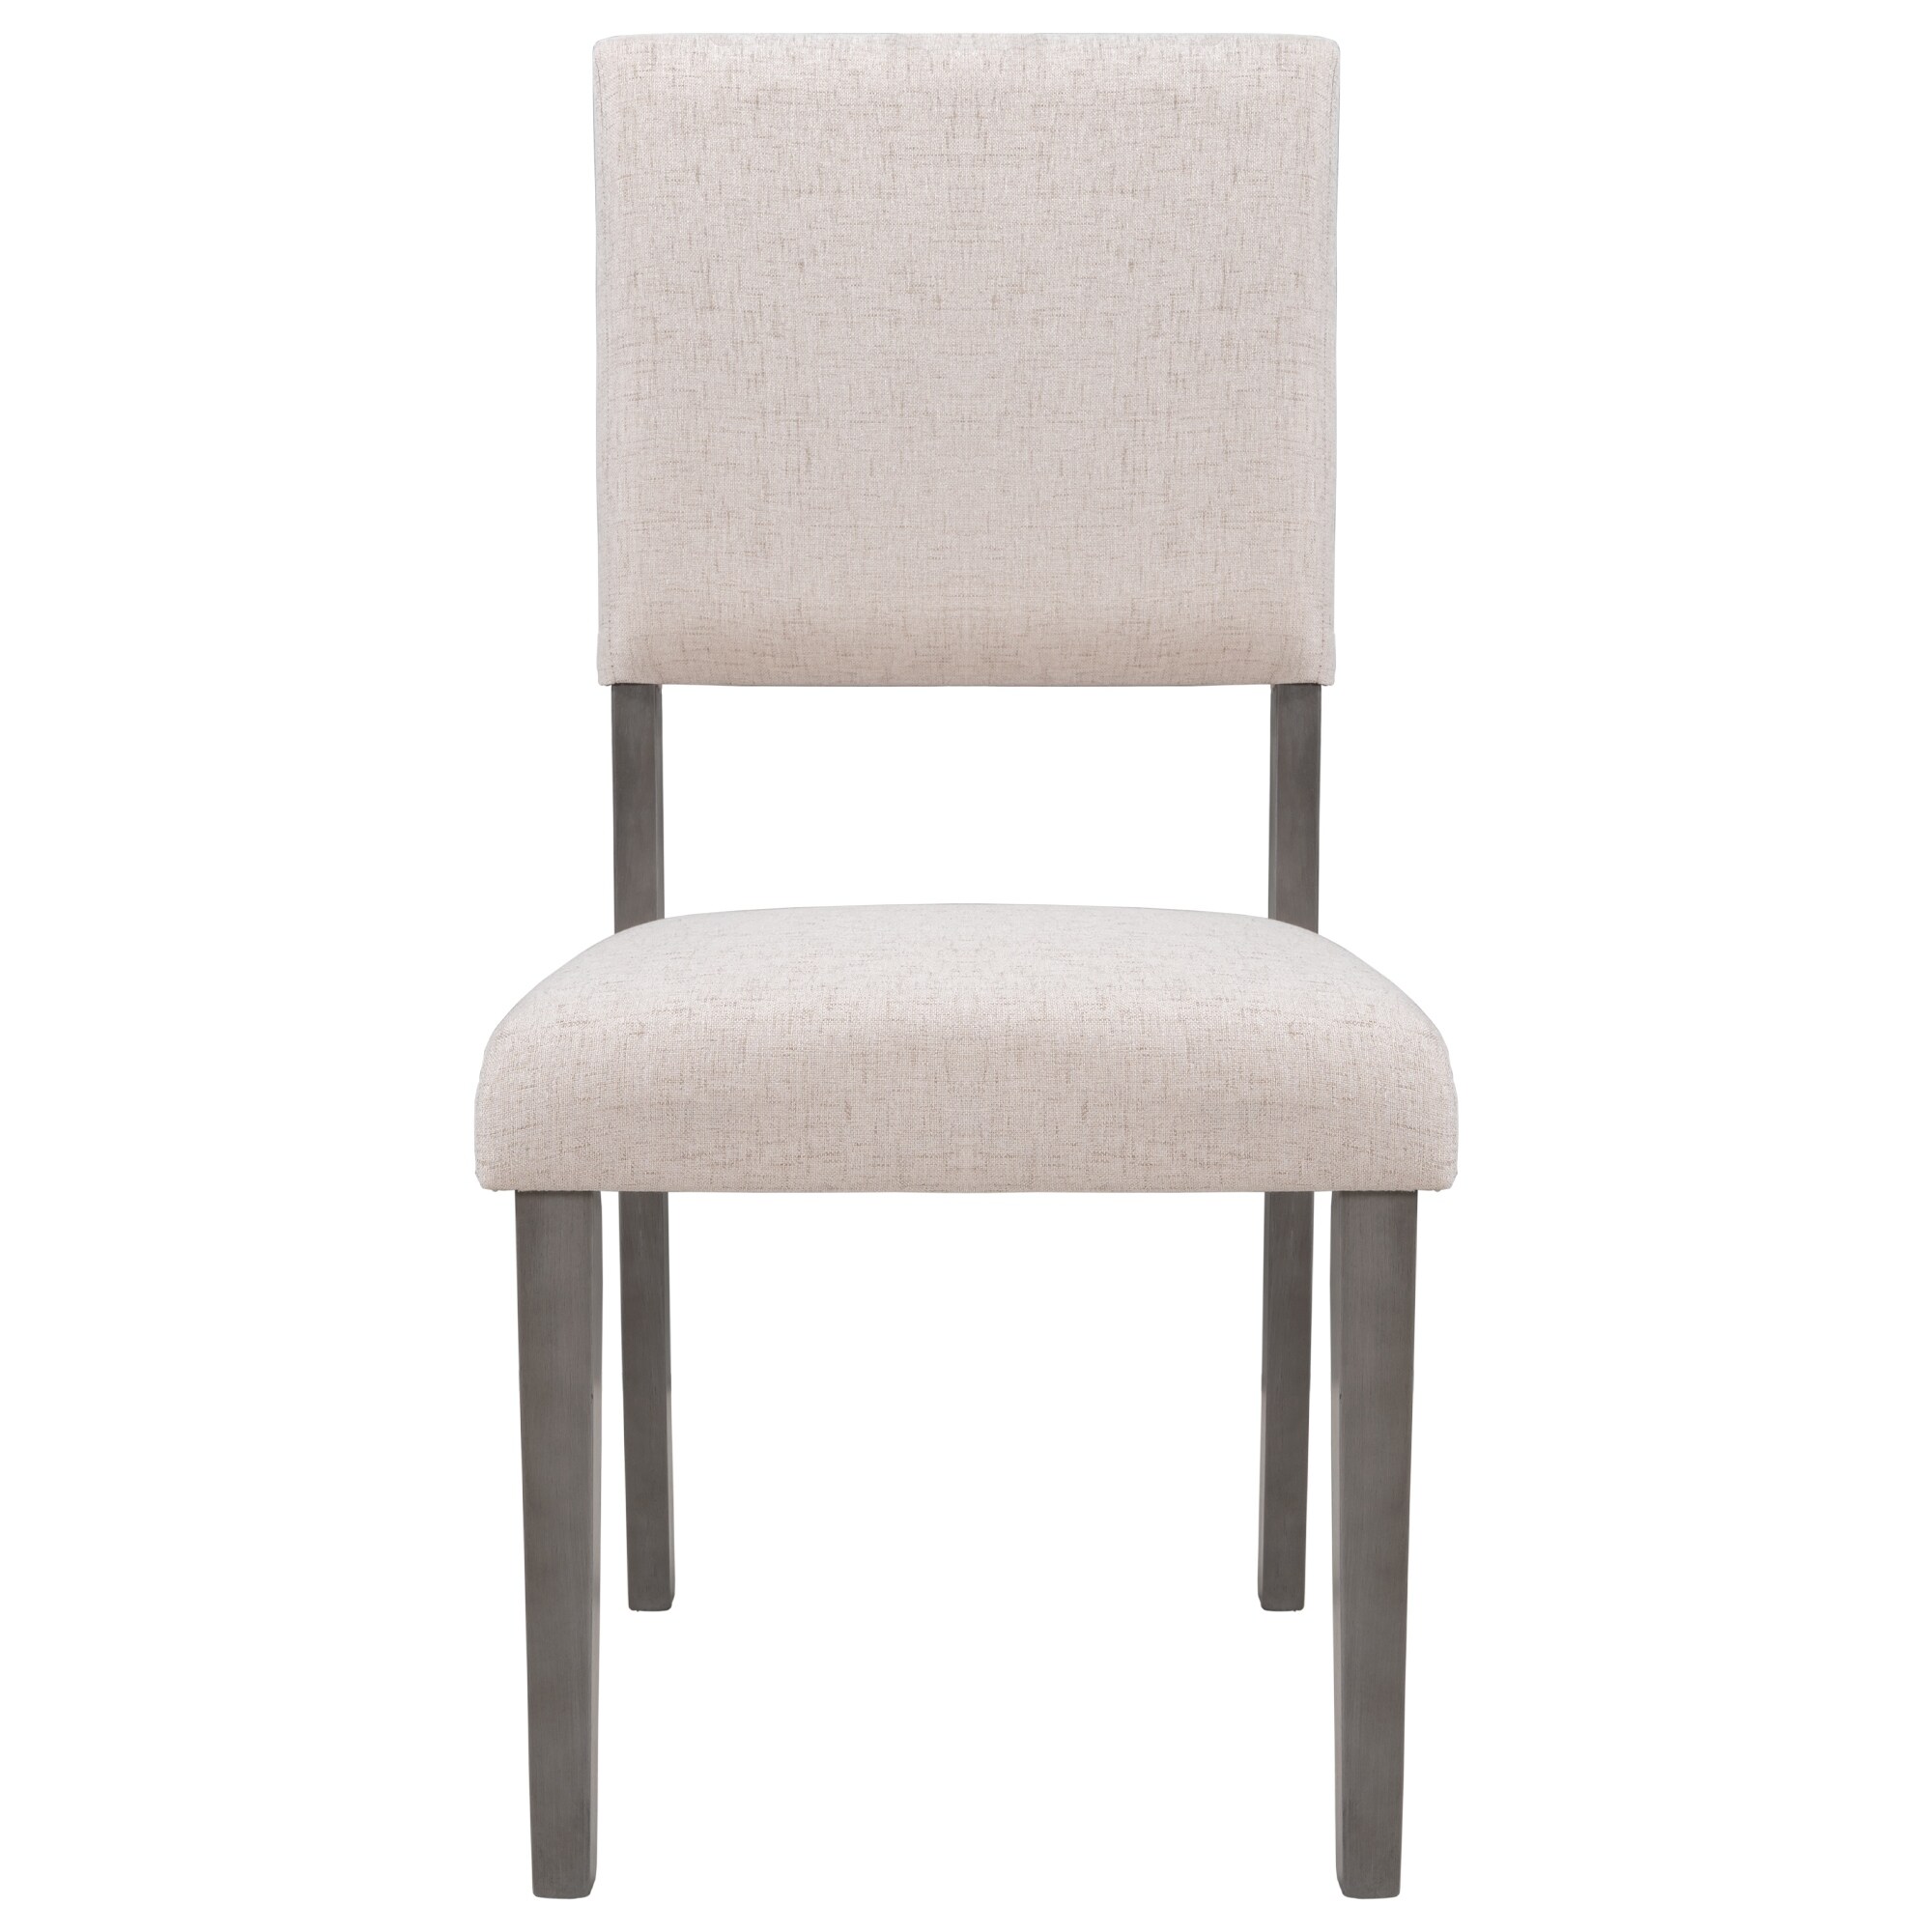 Mid-Century Wood 4 Upholstered Dining Chairs for Small Places, Beige